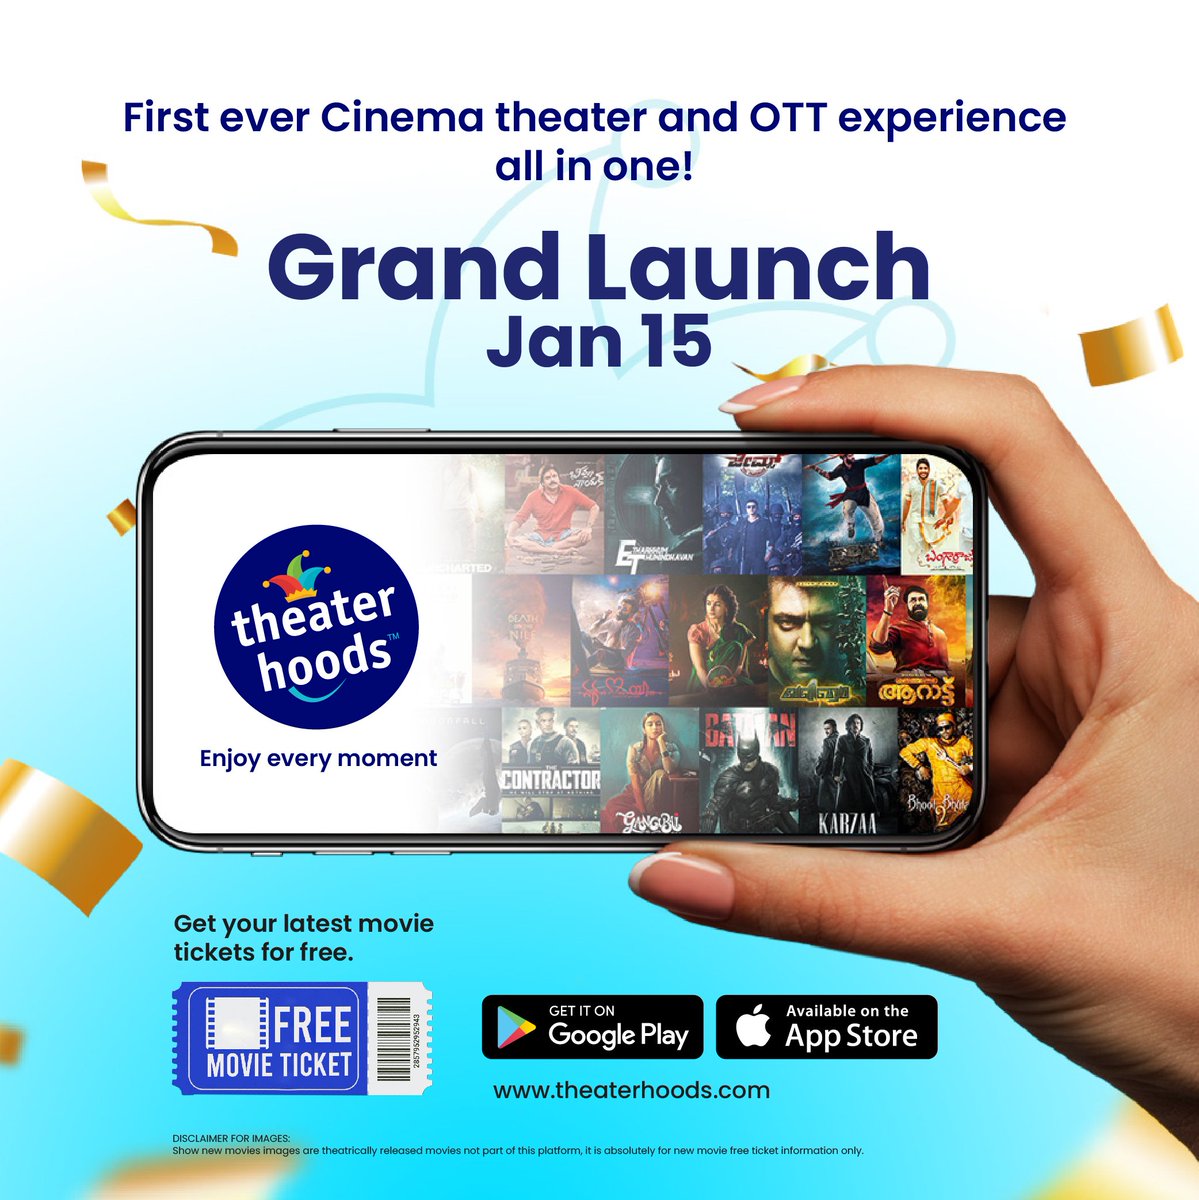 First ever Cinema theater and OTT experience all in one!  Grand Launch on Jan 15, 2022. Download @theaterhoods  app and celebrate new films get your free tickets. 

#theaterhoods #newmovie #freetickets #ott #grandlaunch #freemovietickets #enjoyeverymoment❤️